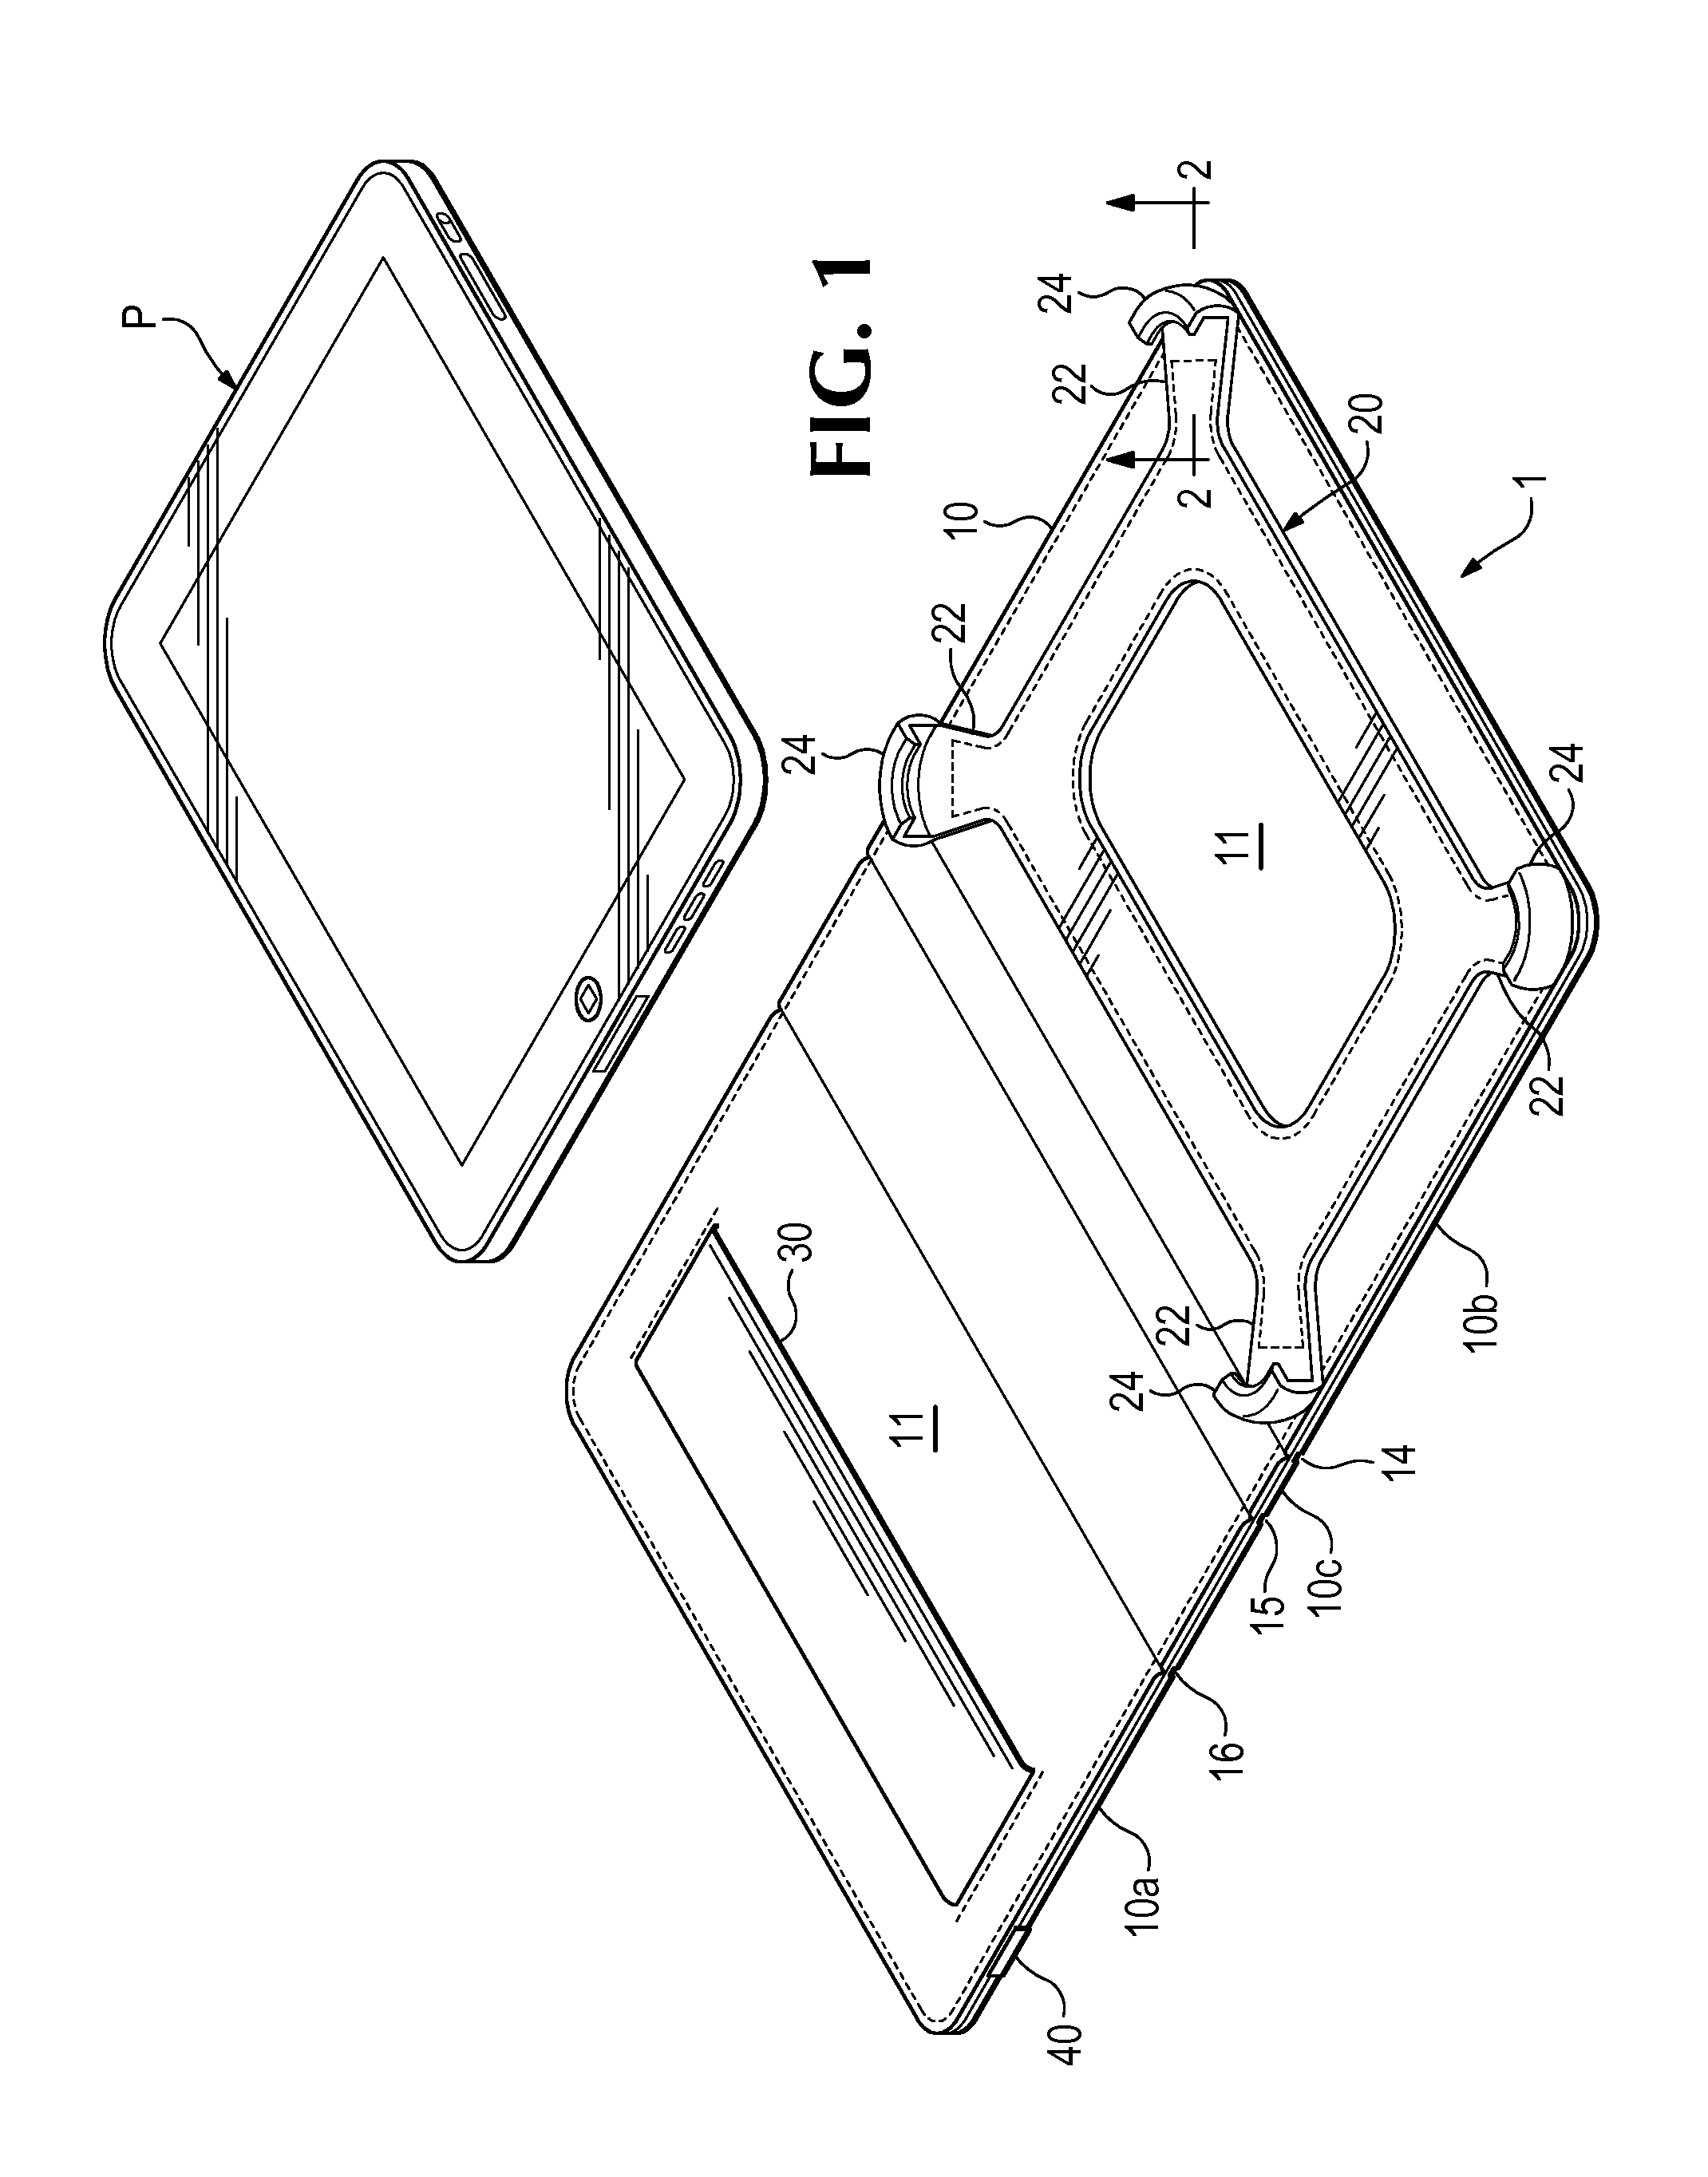 Cover for portable electronic device